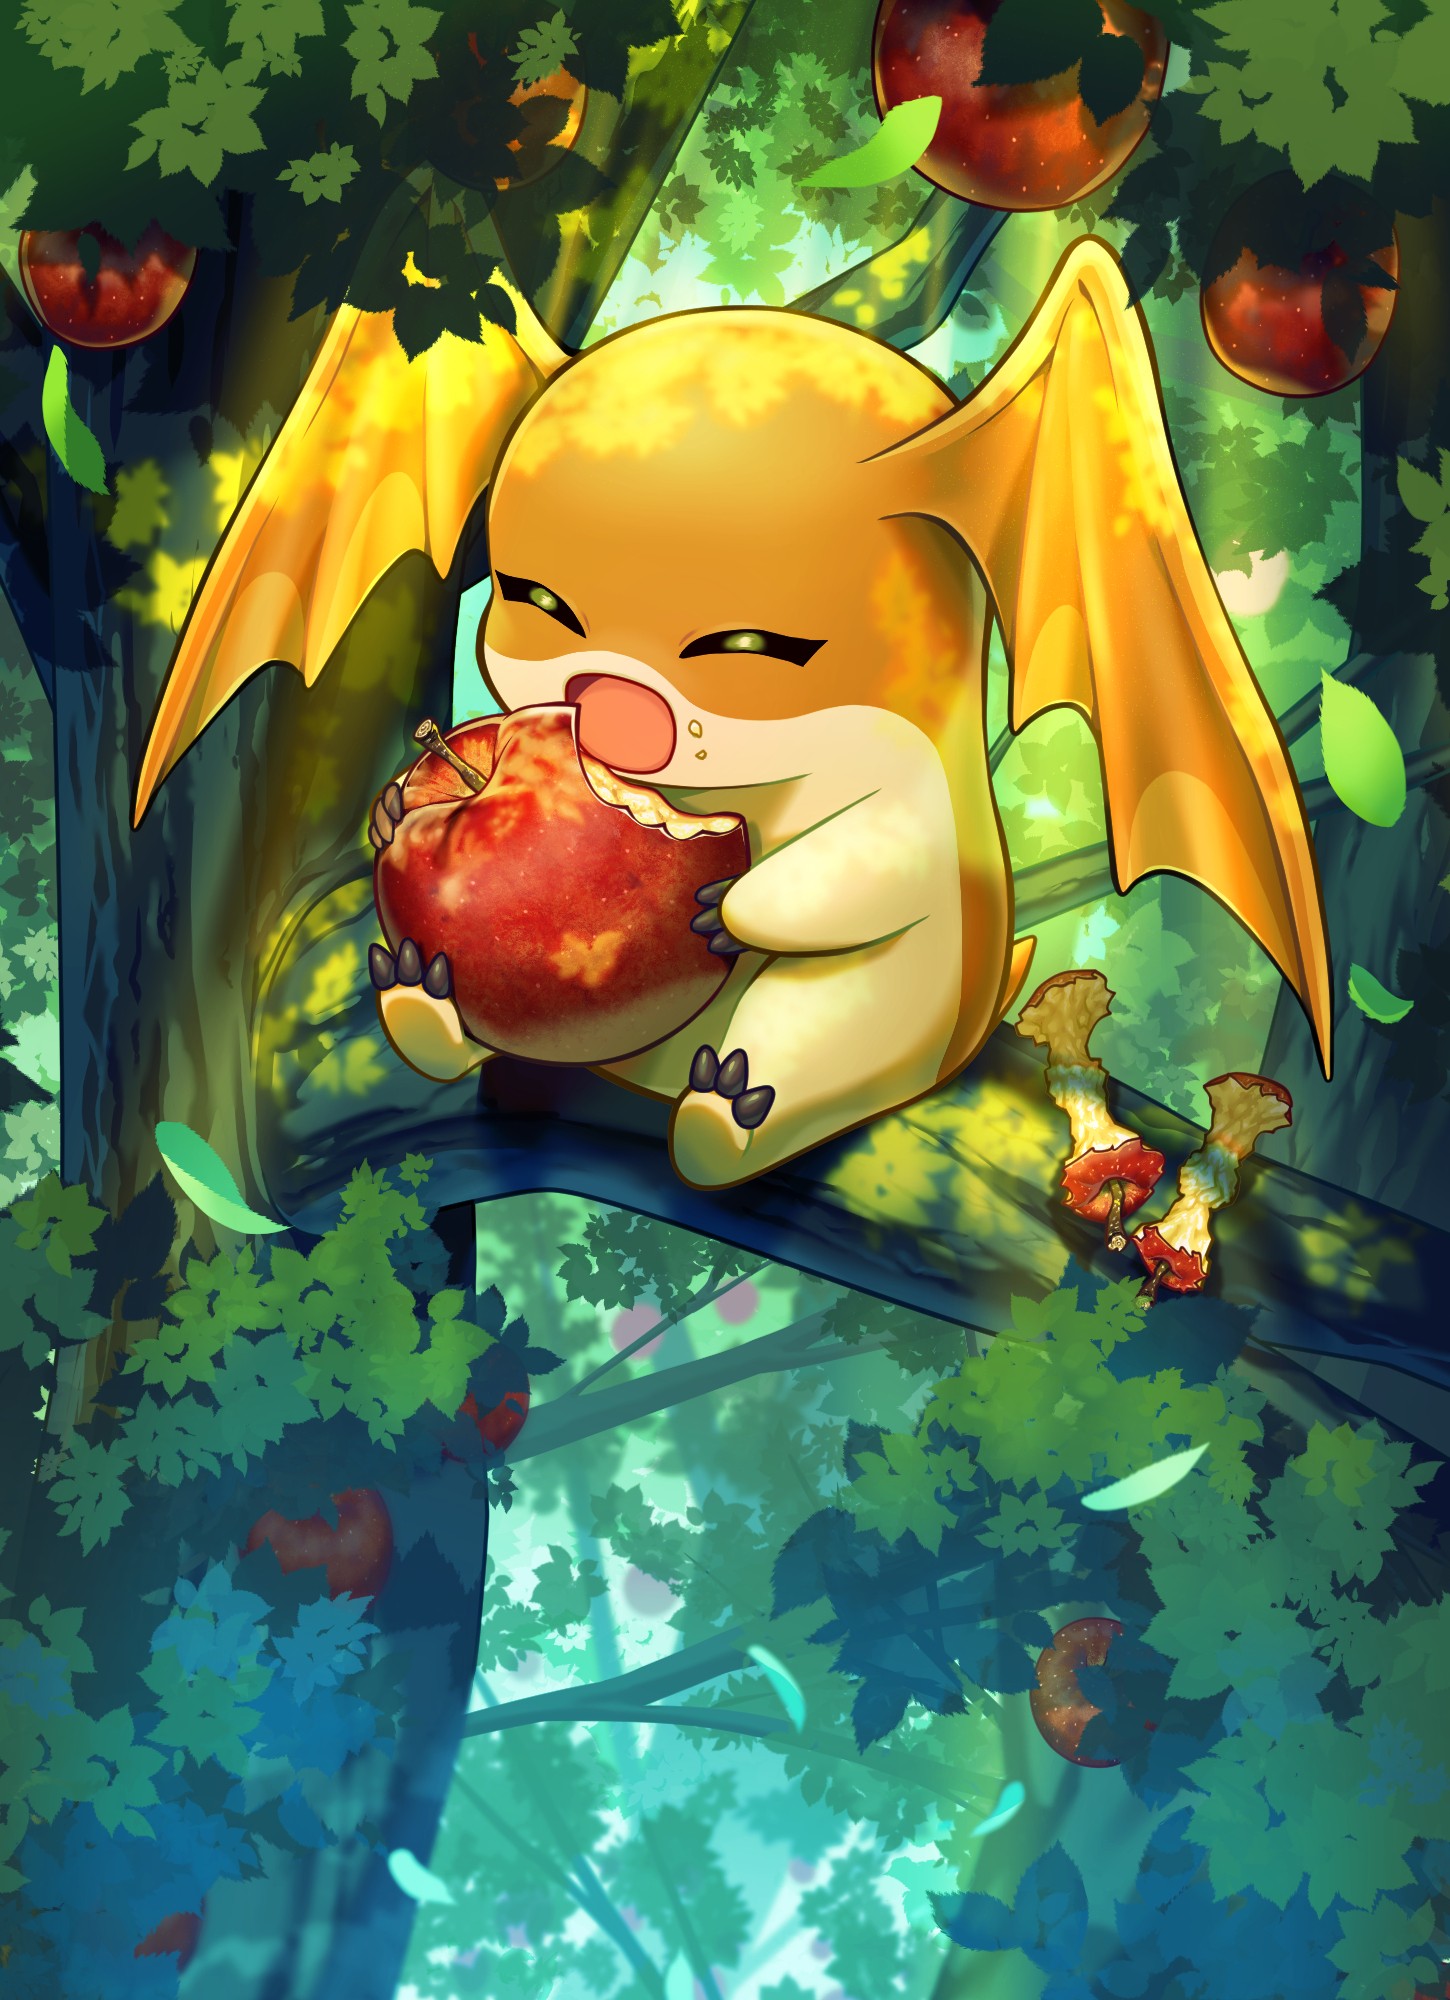 Patamon is eating an apple